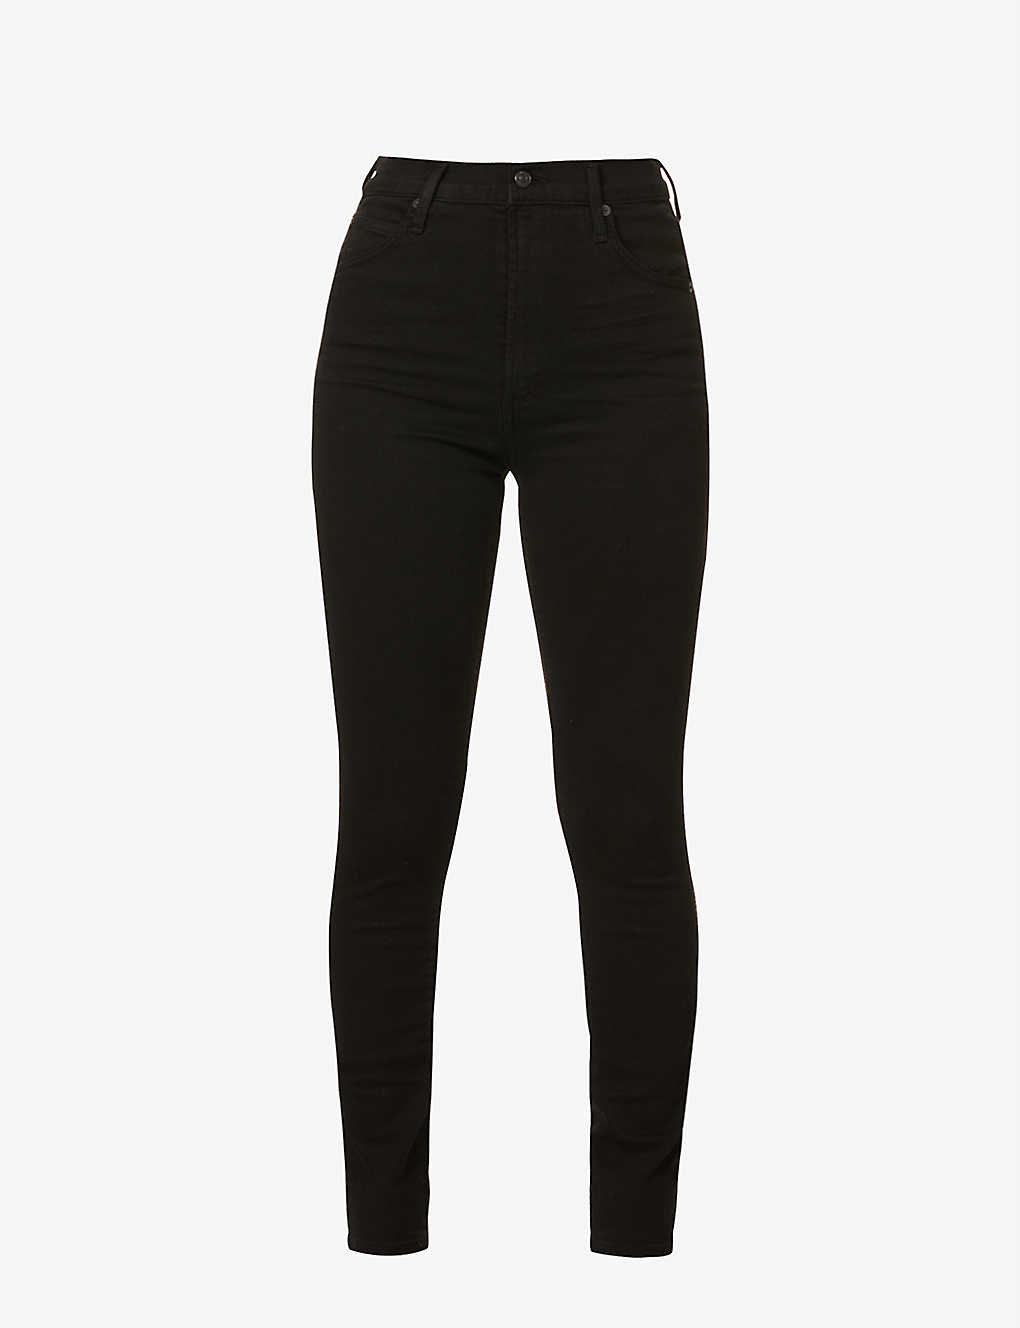 Citizens Of Humanity Chrissy Skinny High-rise Jeans In Plush Black